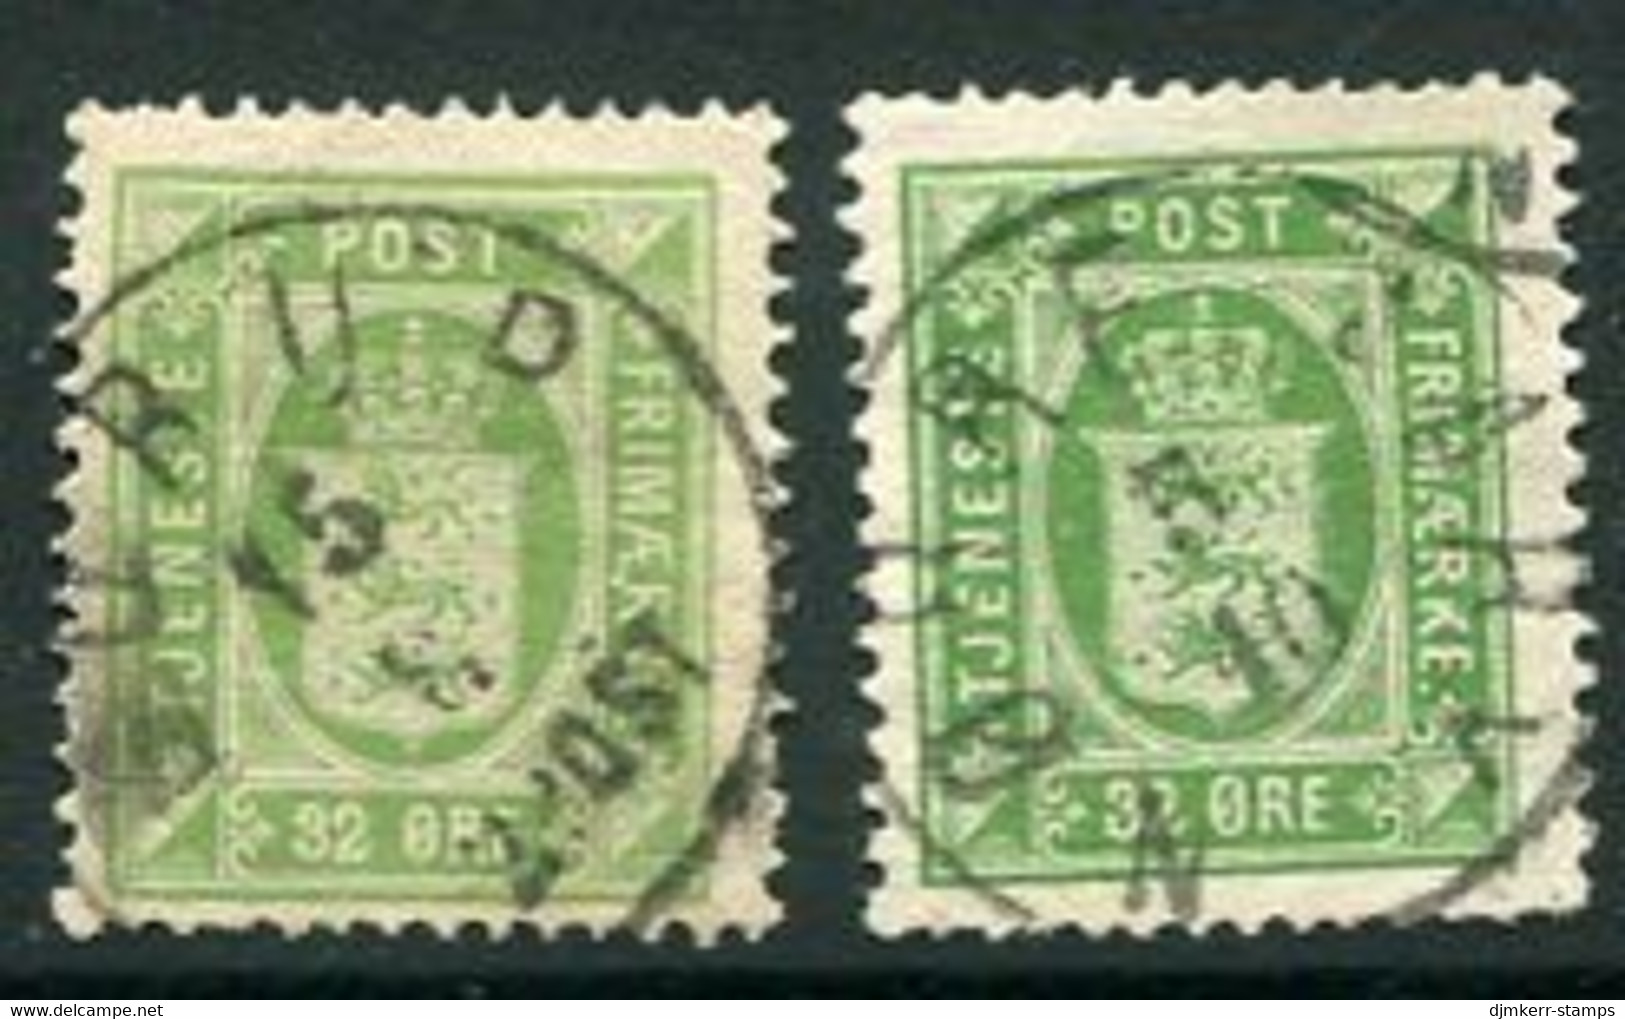 DENMARK 1875 Official 32 Øre Perforated 14 X 13½ Yellow-green And Green, Used.  SG O97-98 Cat. £109. - Dienstzegels